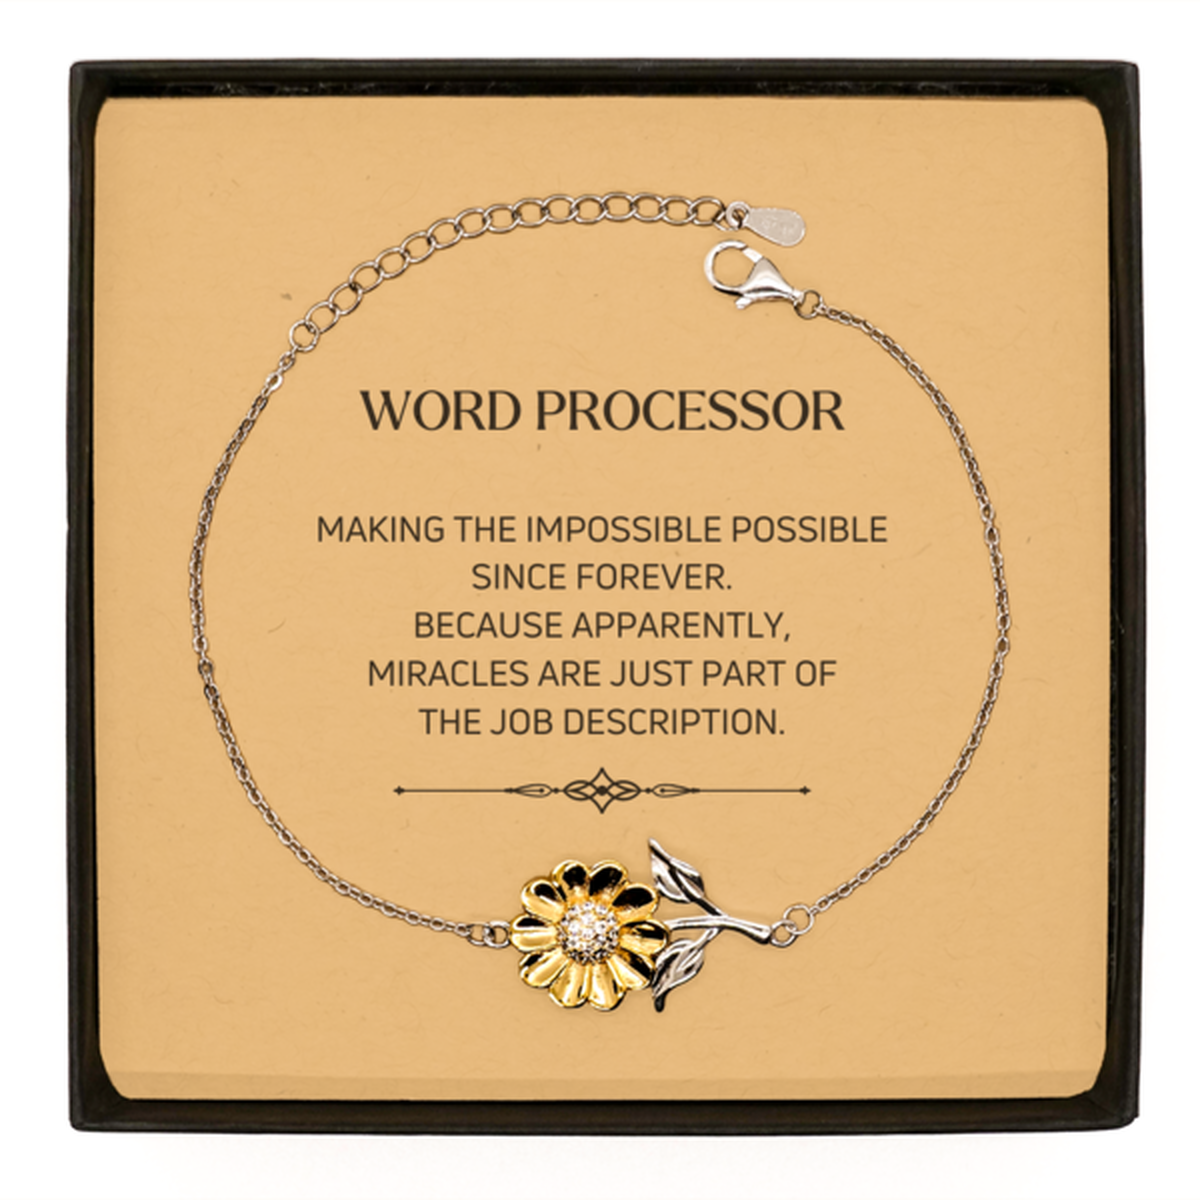 Funny Word Processor Gifts, Miracles are just part of the job description, Inspirational Birthday Sunflower Bracelet For Word Processor, Men, Women, Coworkers, Friends, Boss